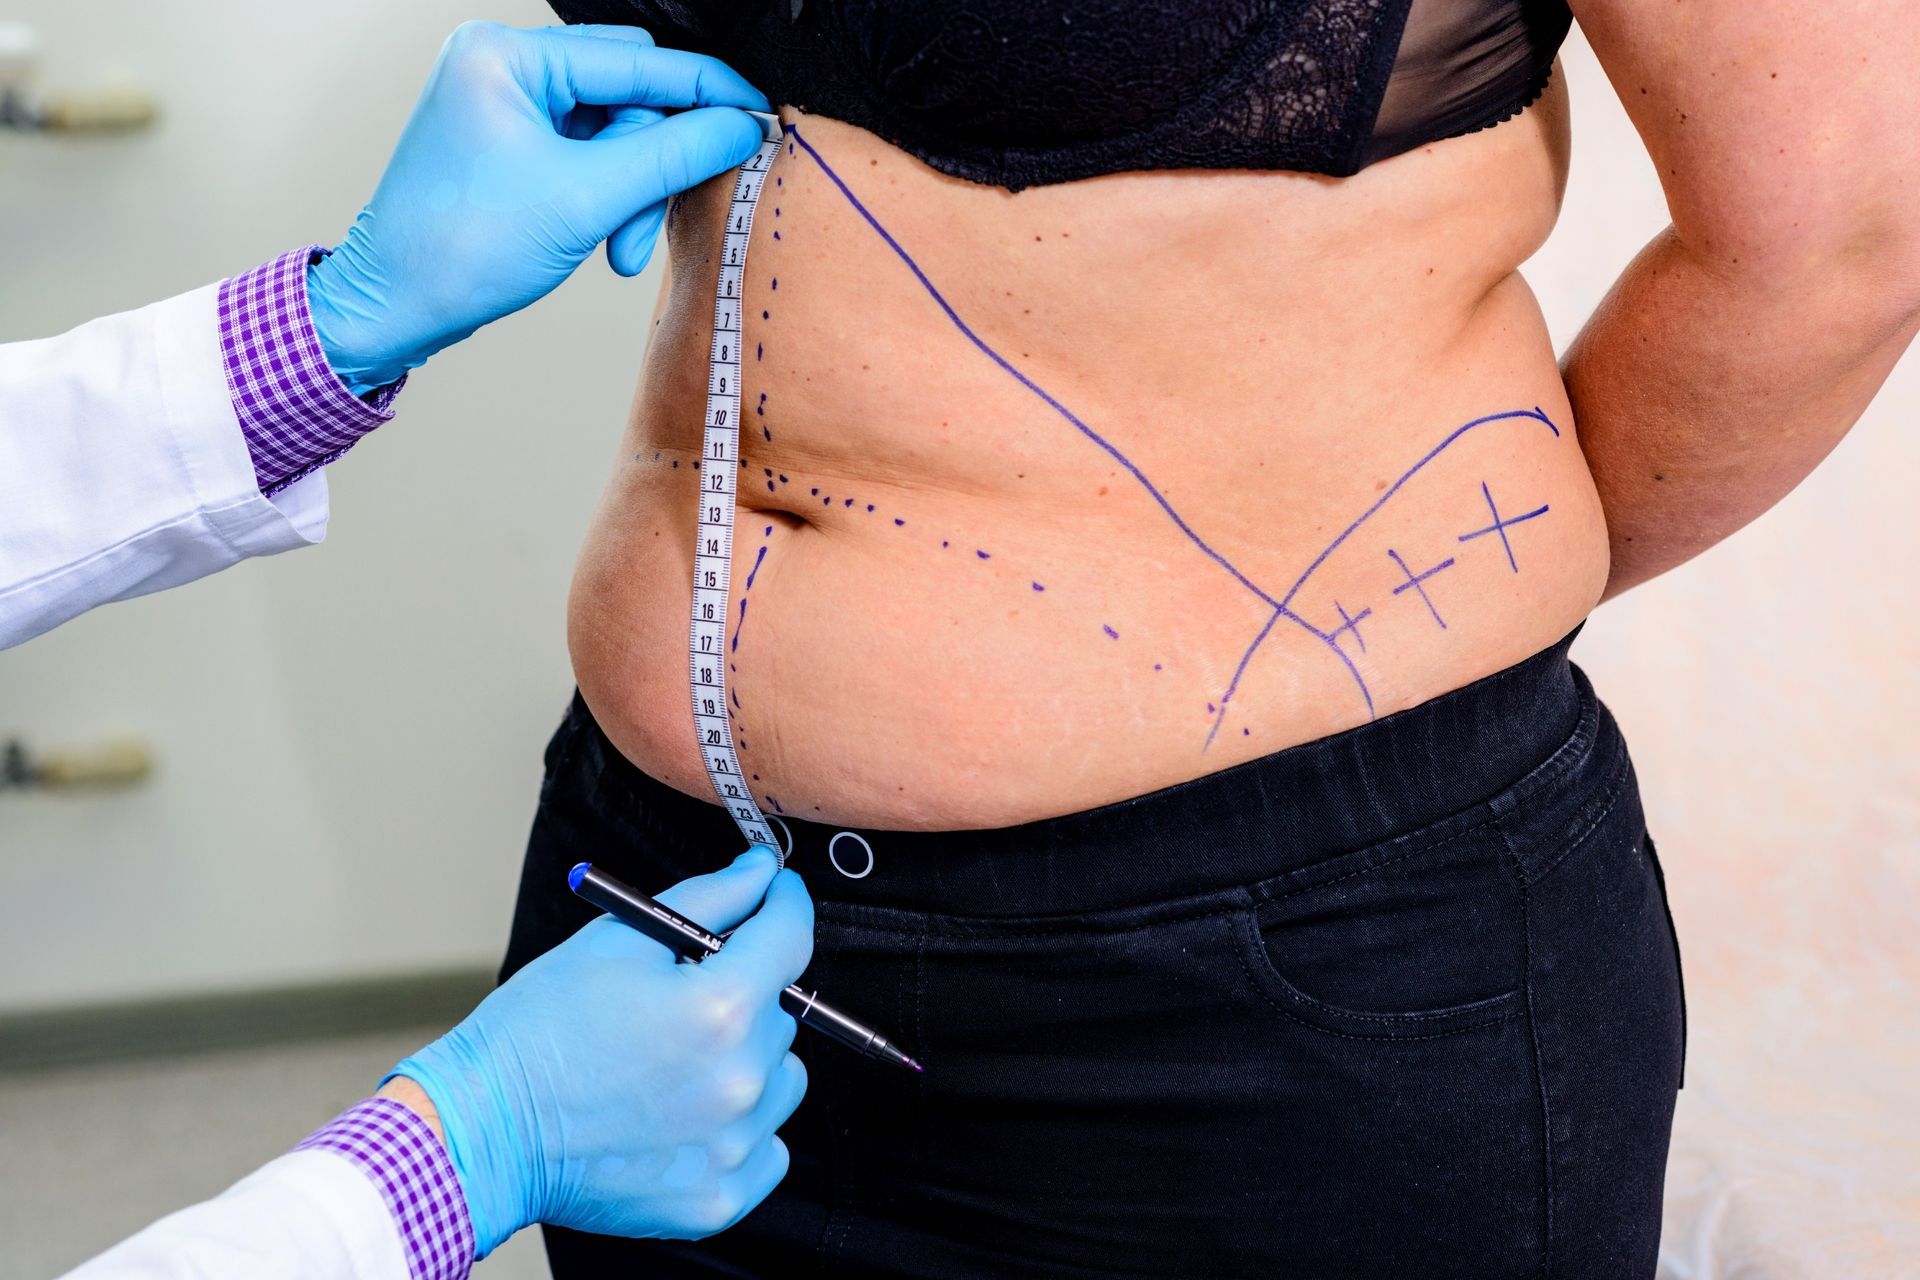 A patient being marked for a tummy tuck procedure by a doctor